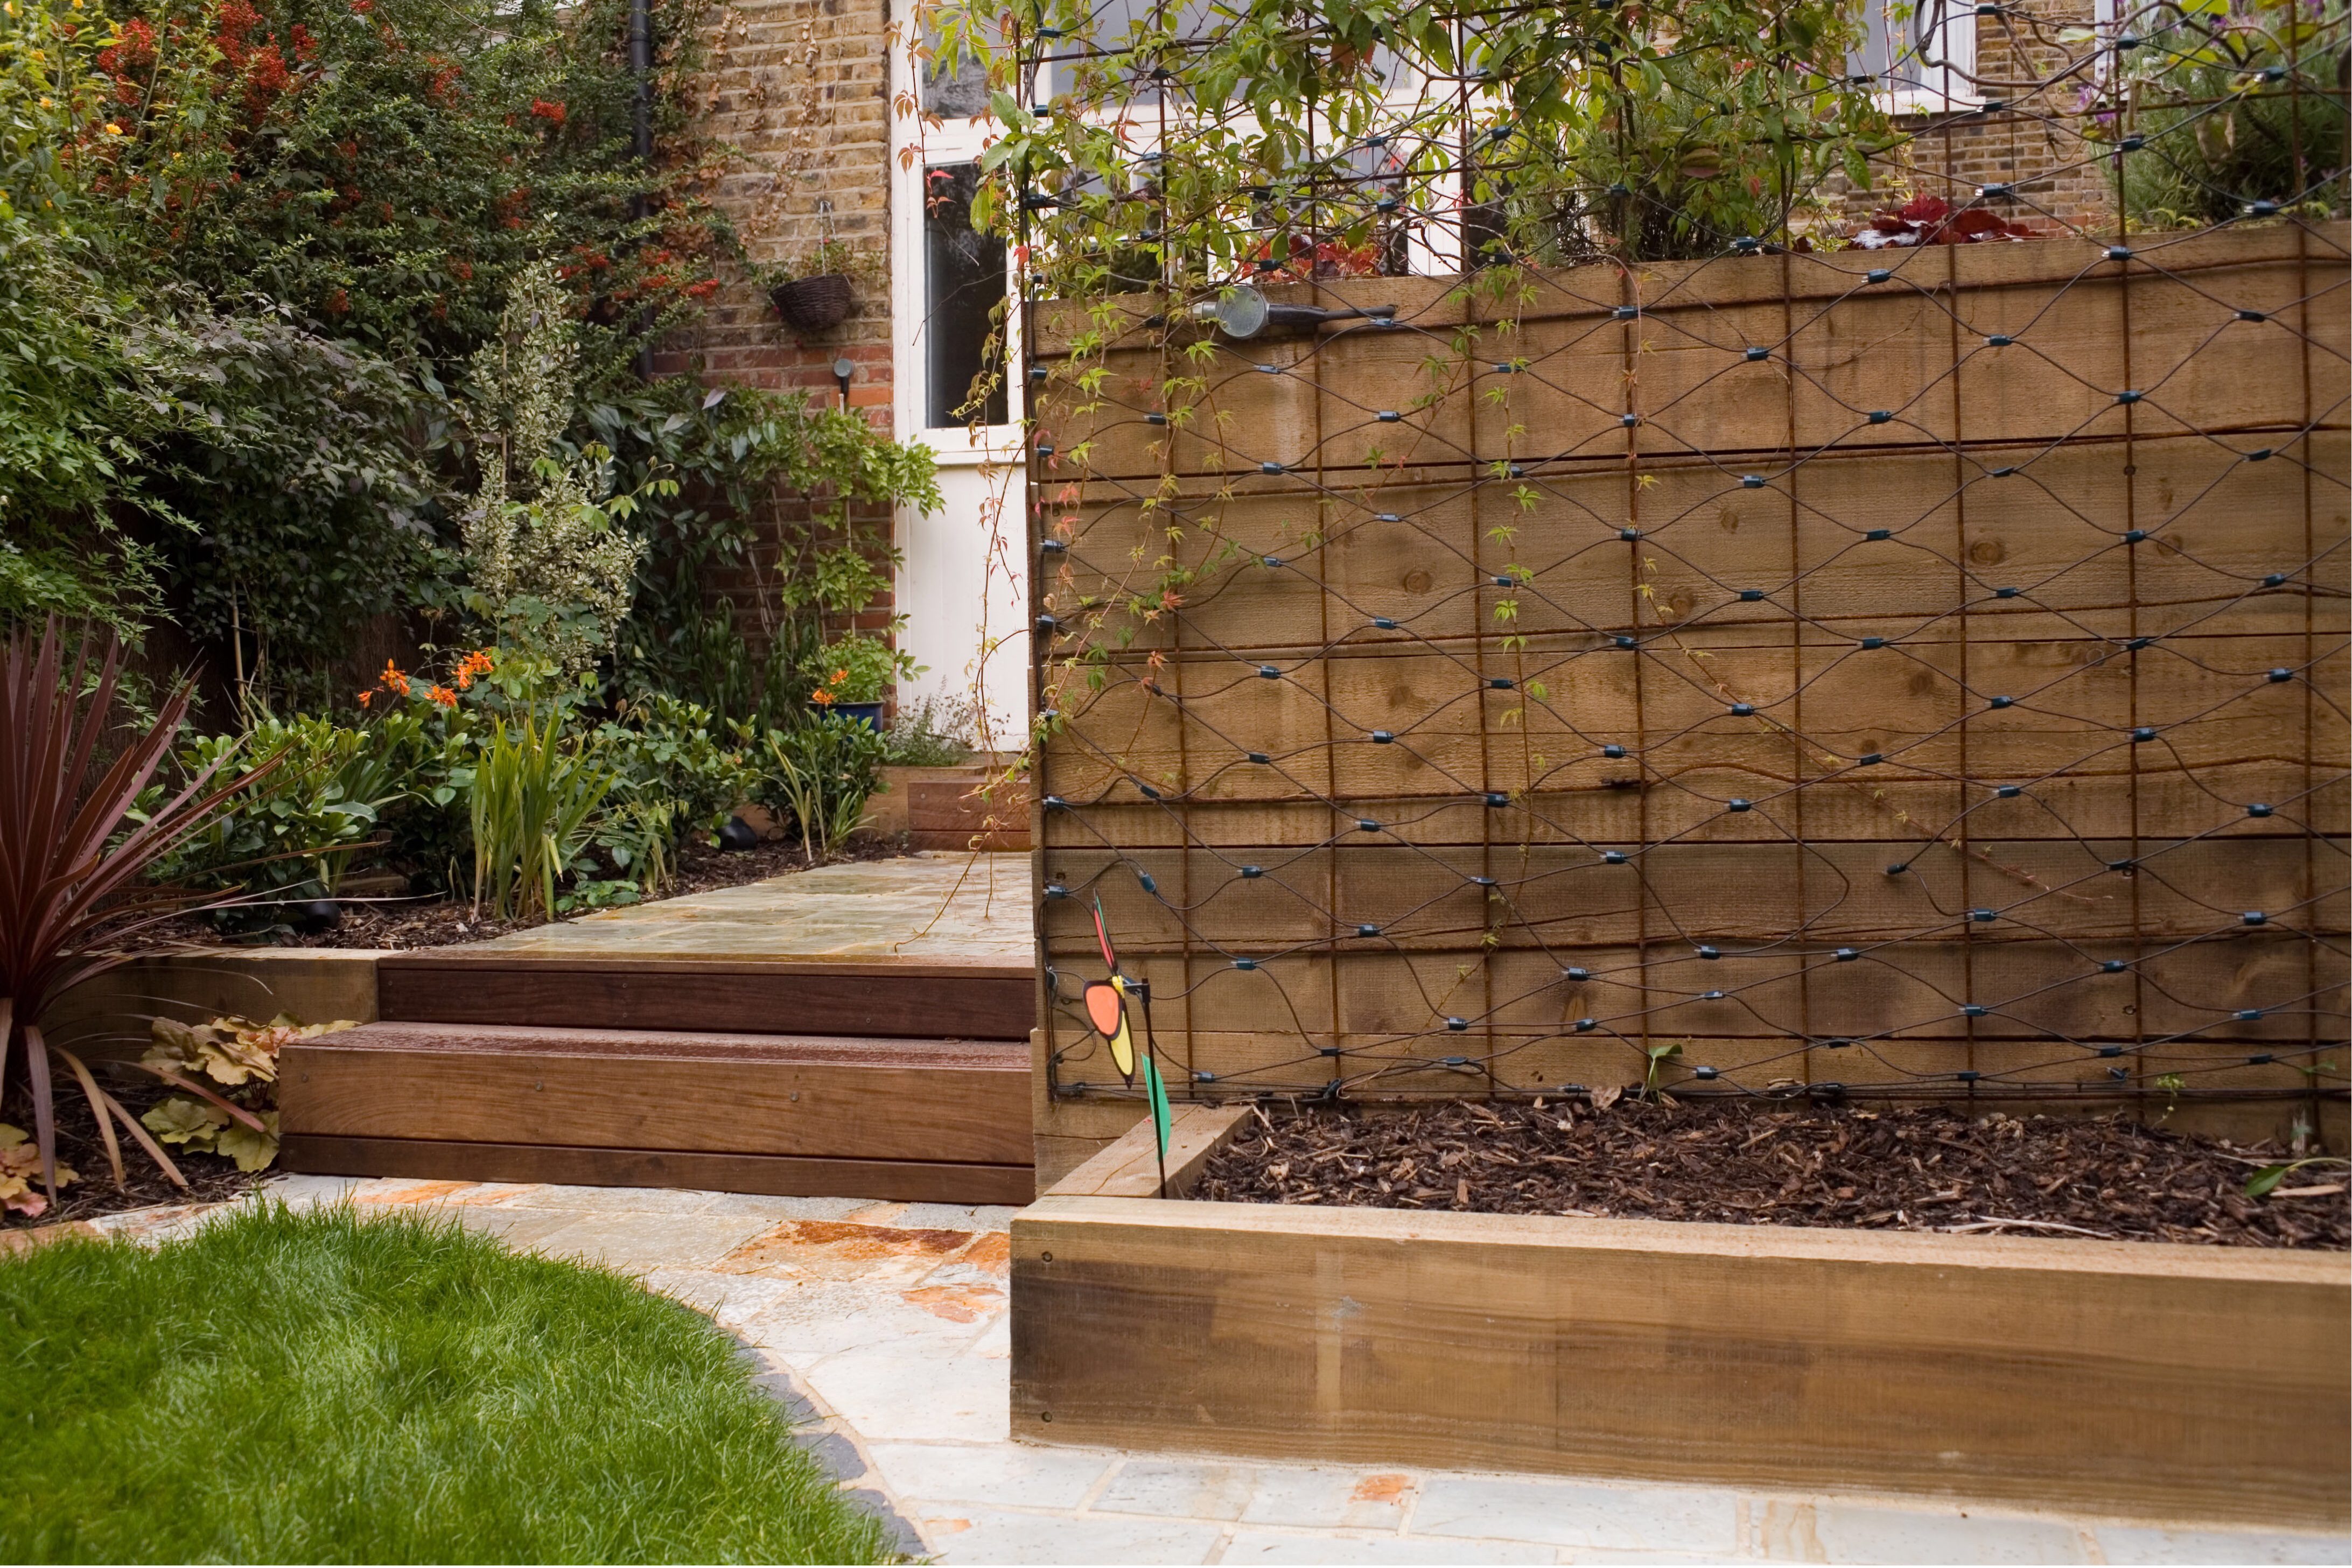 Railway sleepers can be used for levelling ground